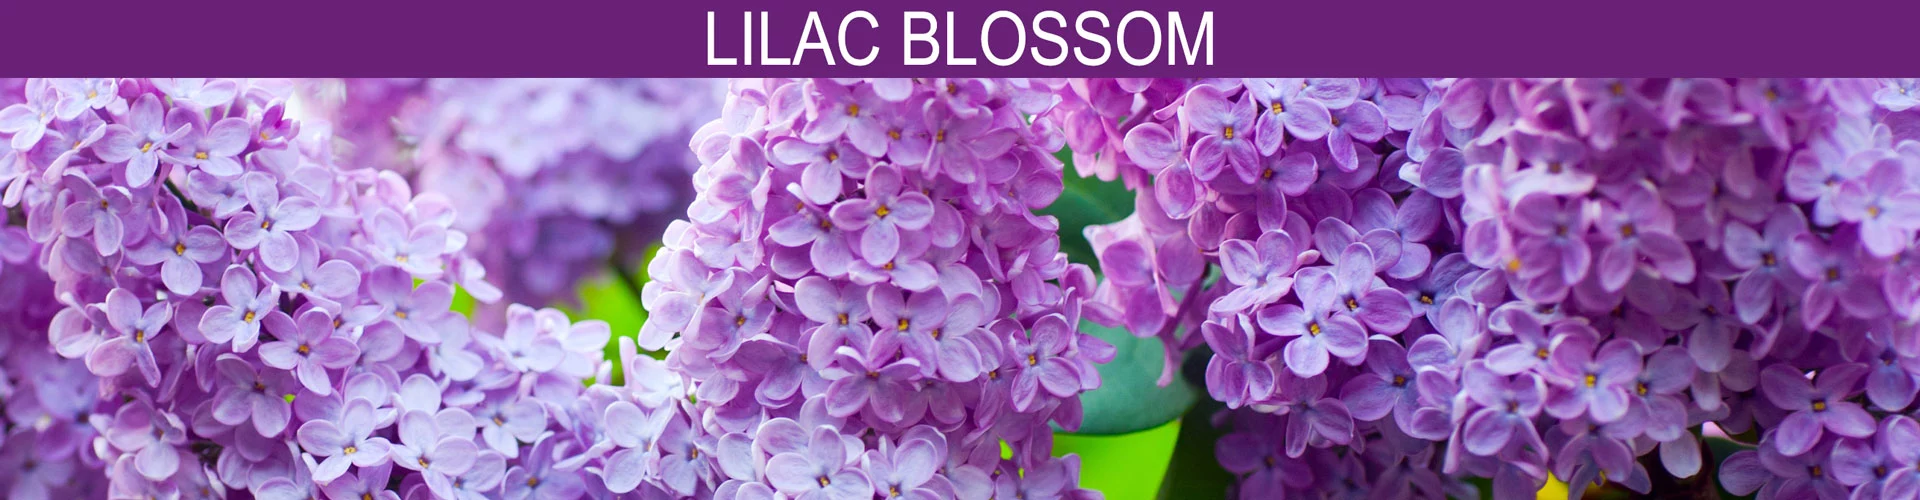 Banner image of rich, floral has captured the invigorating scent of fresh cut lilac bouquets.